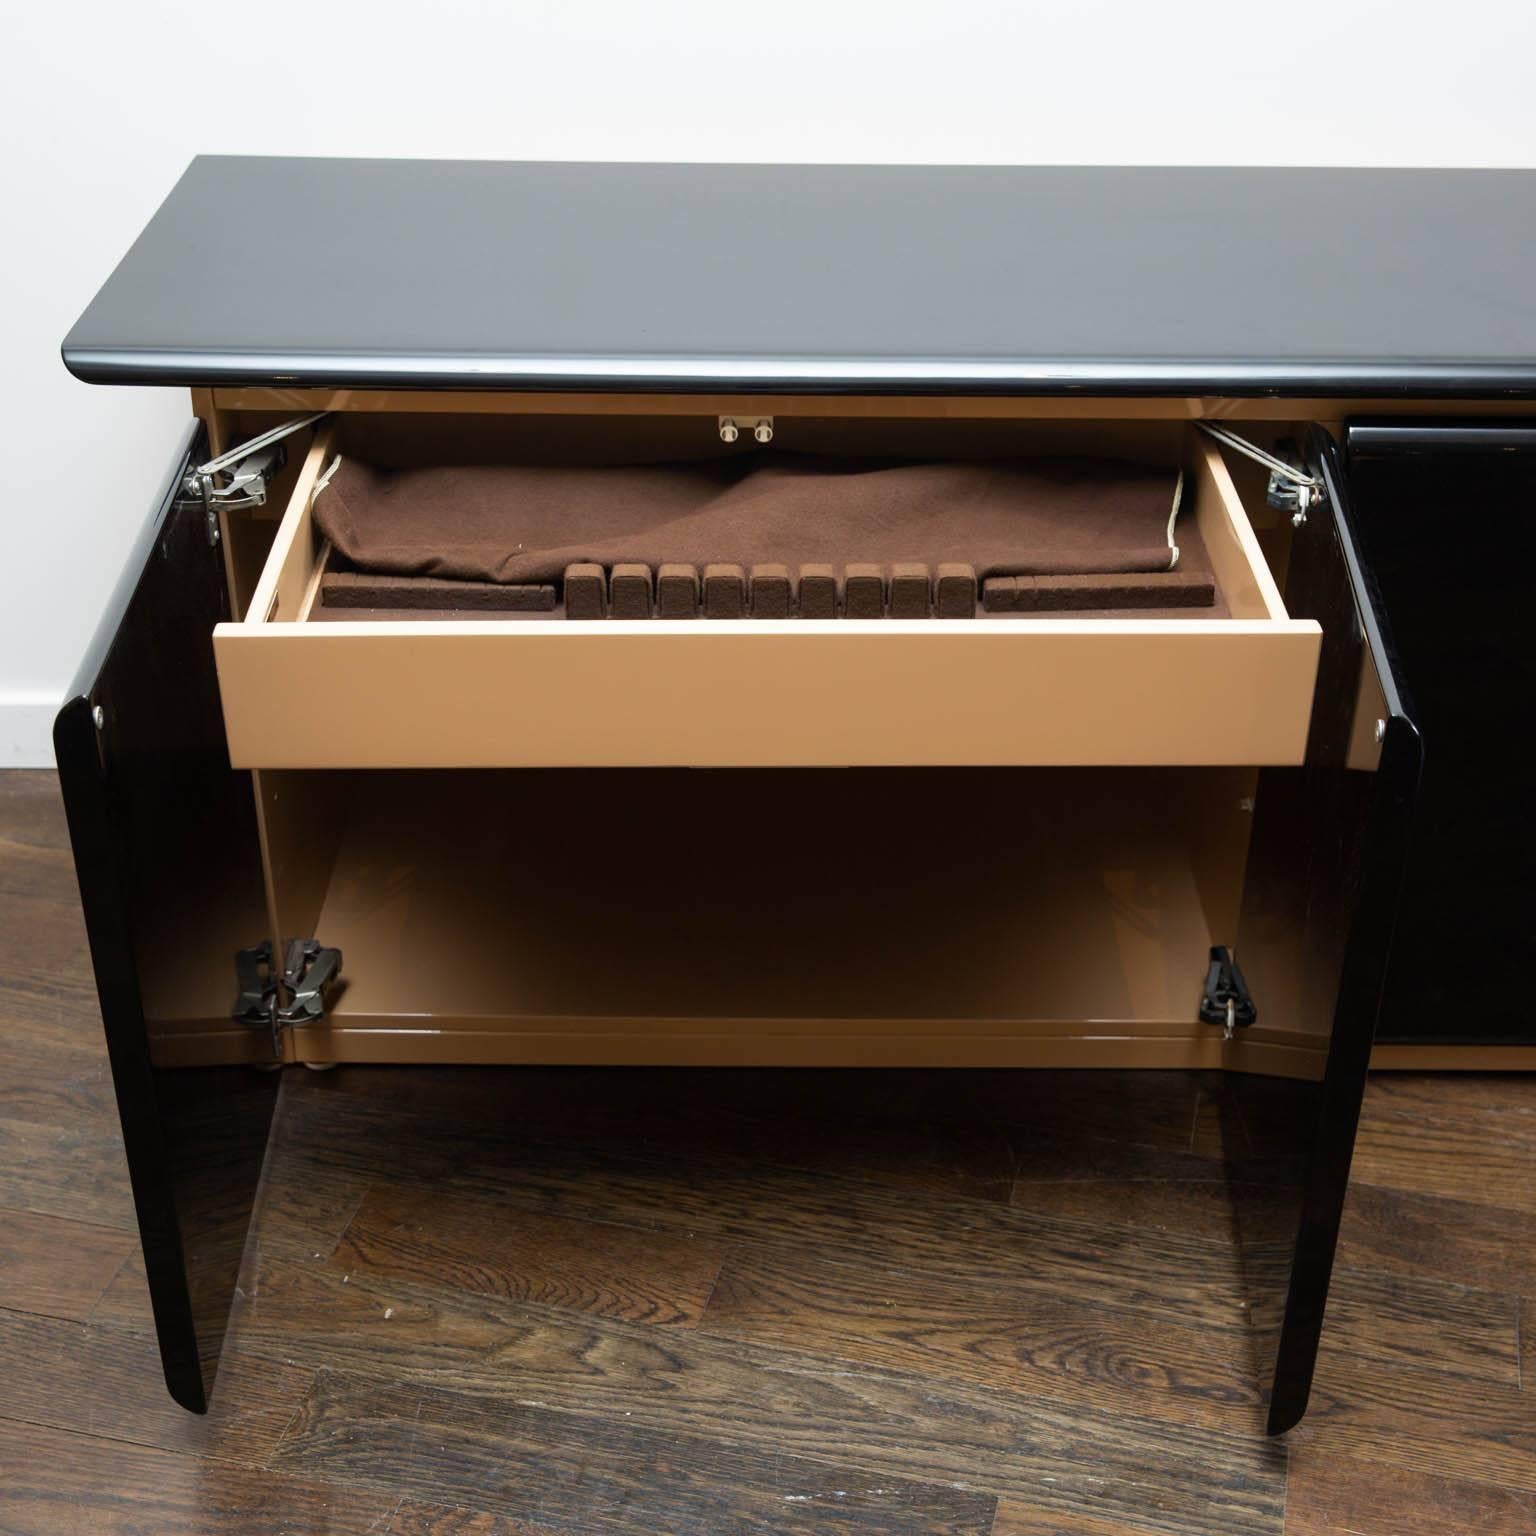 Modern sideboard in a two-toned beige and black lacquer. With silverware drawers and two interior shelves. Interior lights up on right side.